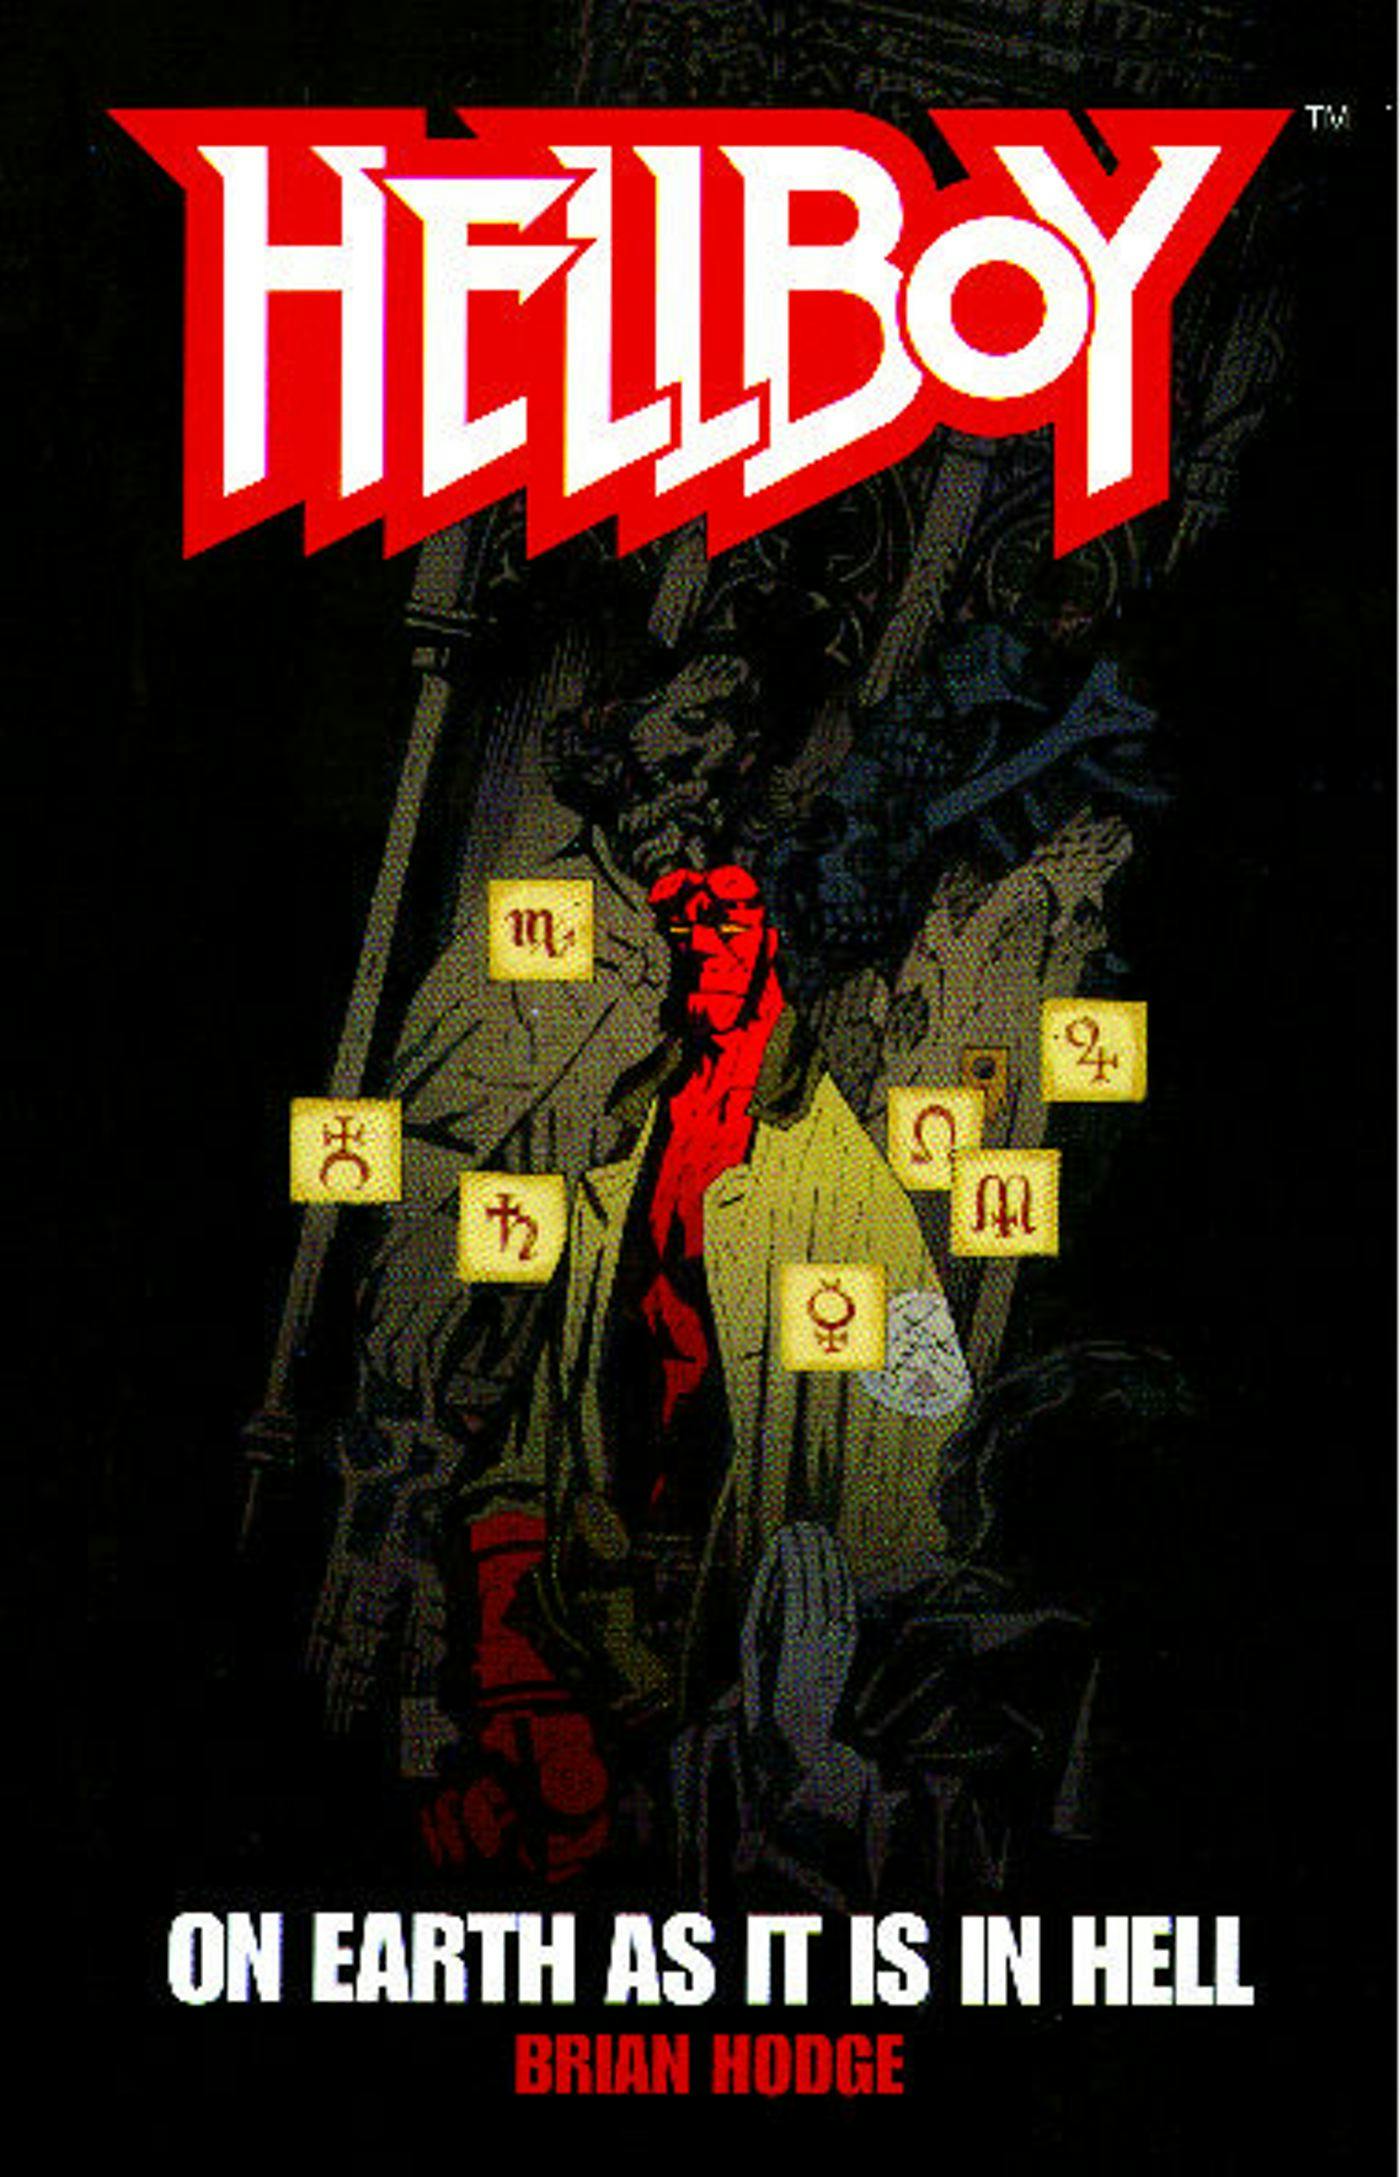 On Earth As It Is In Hell: A Hellboy Novel - undefined